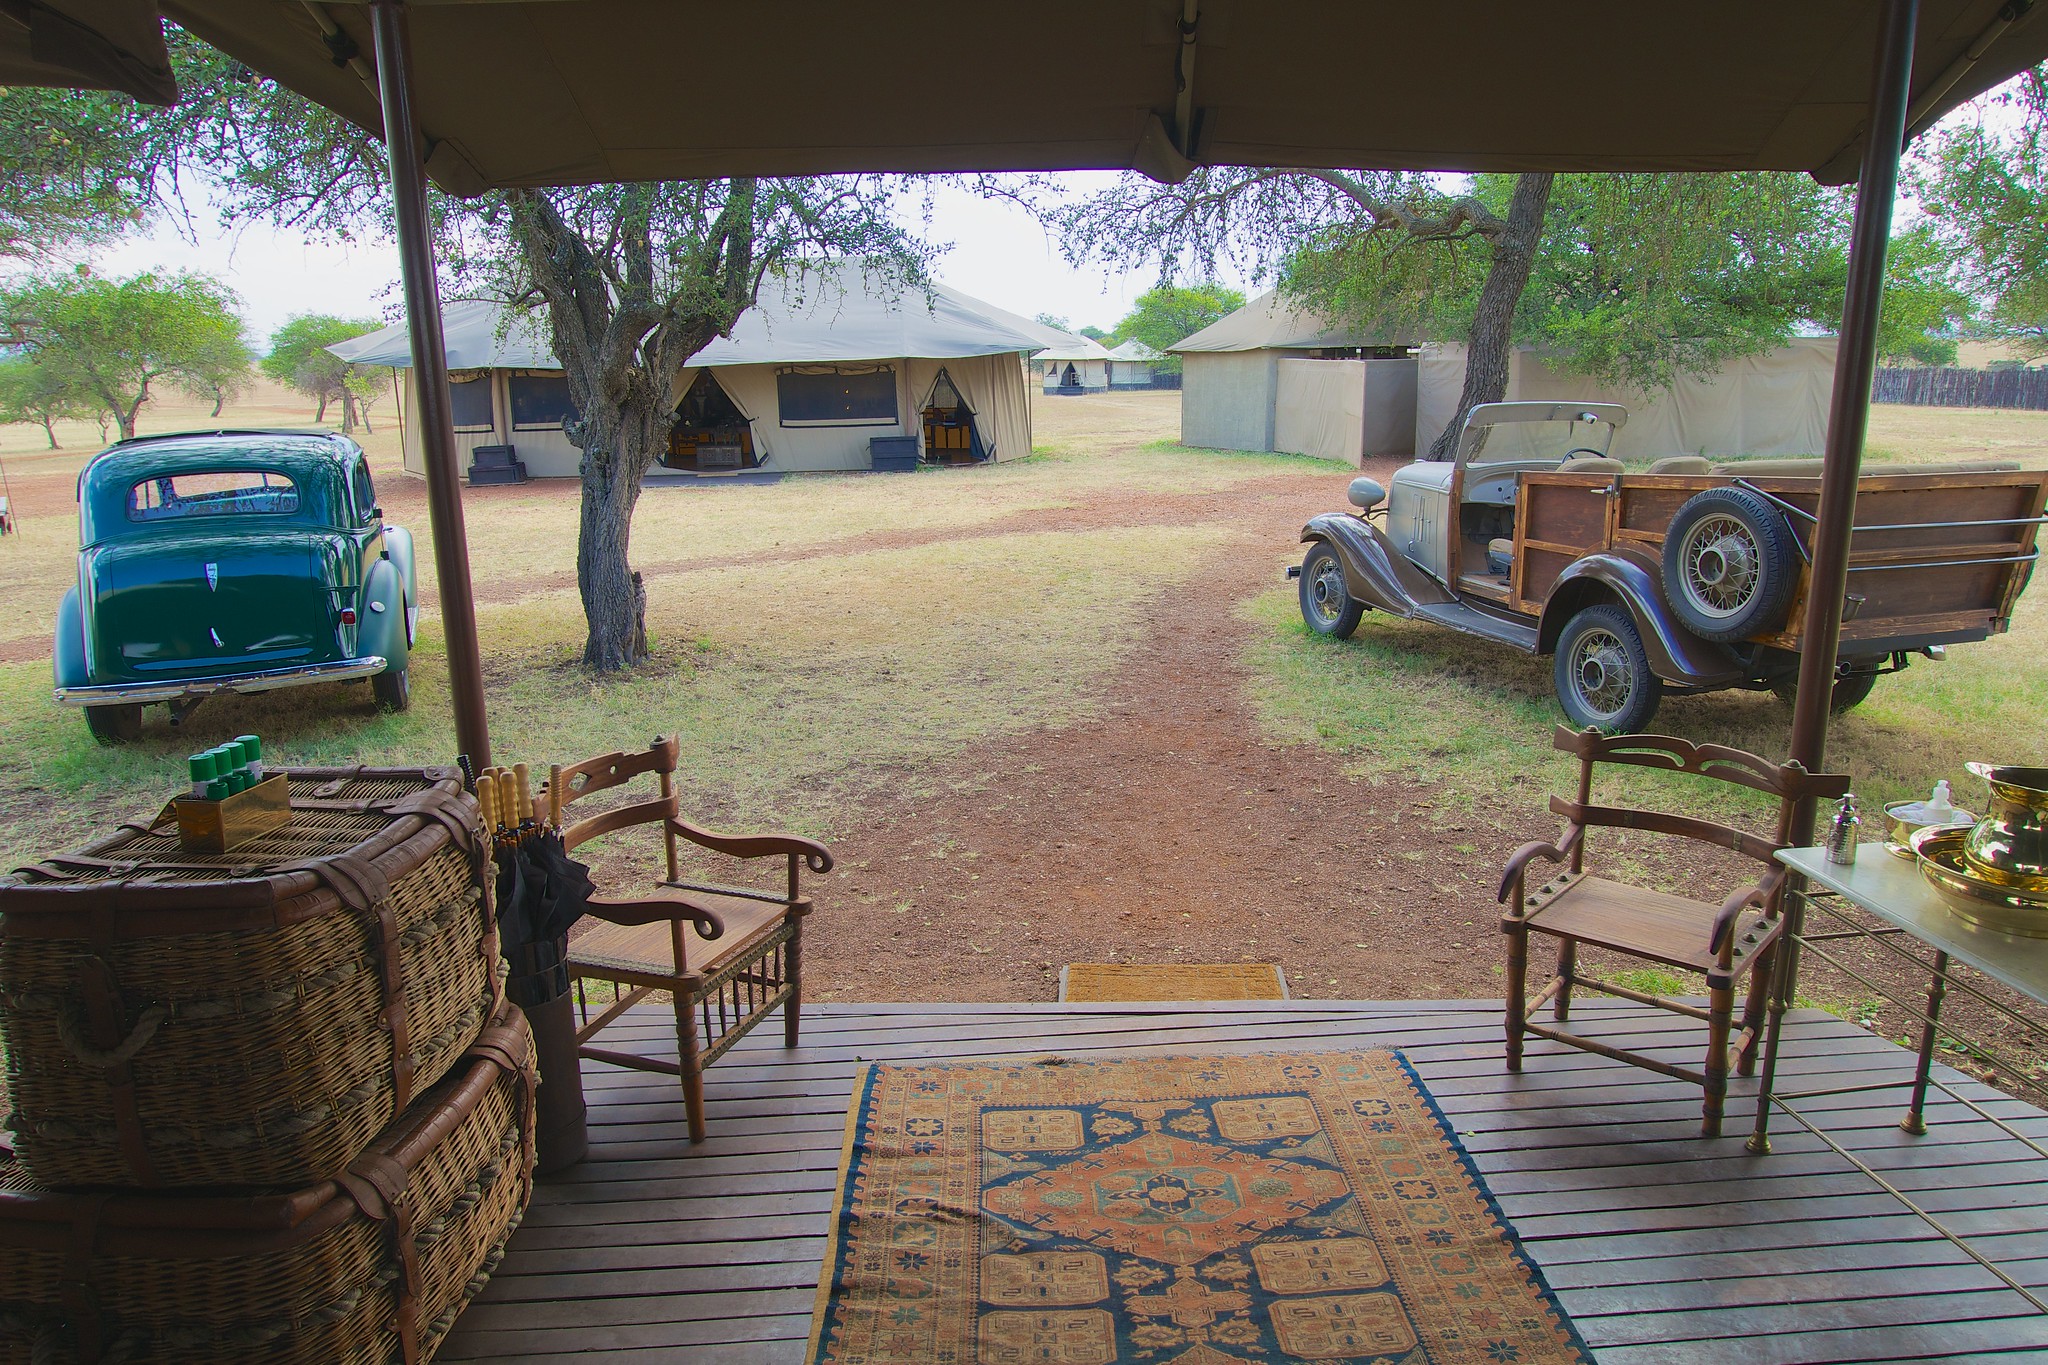 <p>Singita prioritizes nature-based tourism, which has restored the Grumeti Reserve to a thriving home for wildlife. </p>  <p>All year-round, visitors are guaranteed to see wildebeest, elephants, and buffalo. The camp has also contributed to reintroducing<strong> the eastern black rhino </strong>to the area.</p>